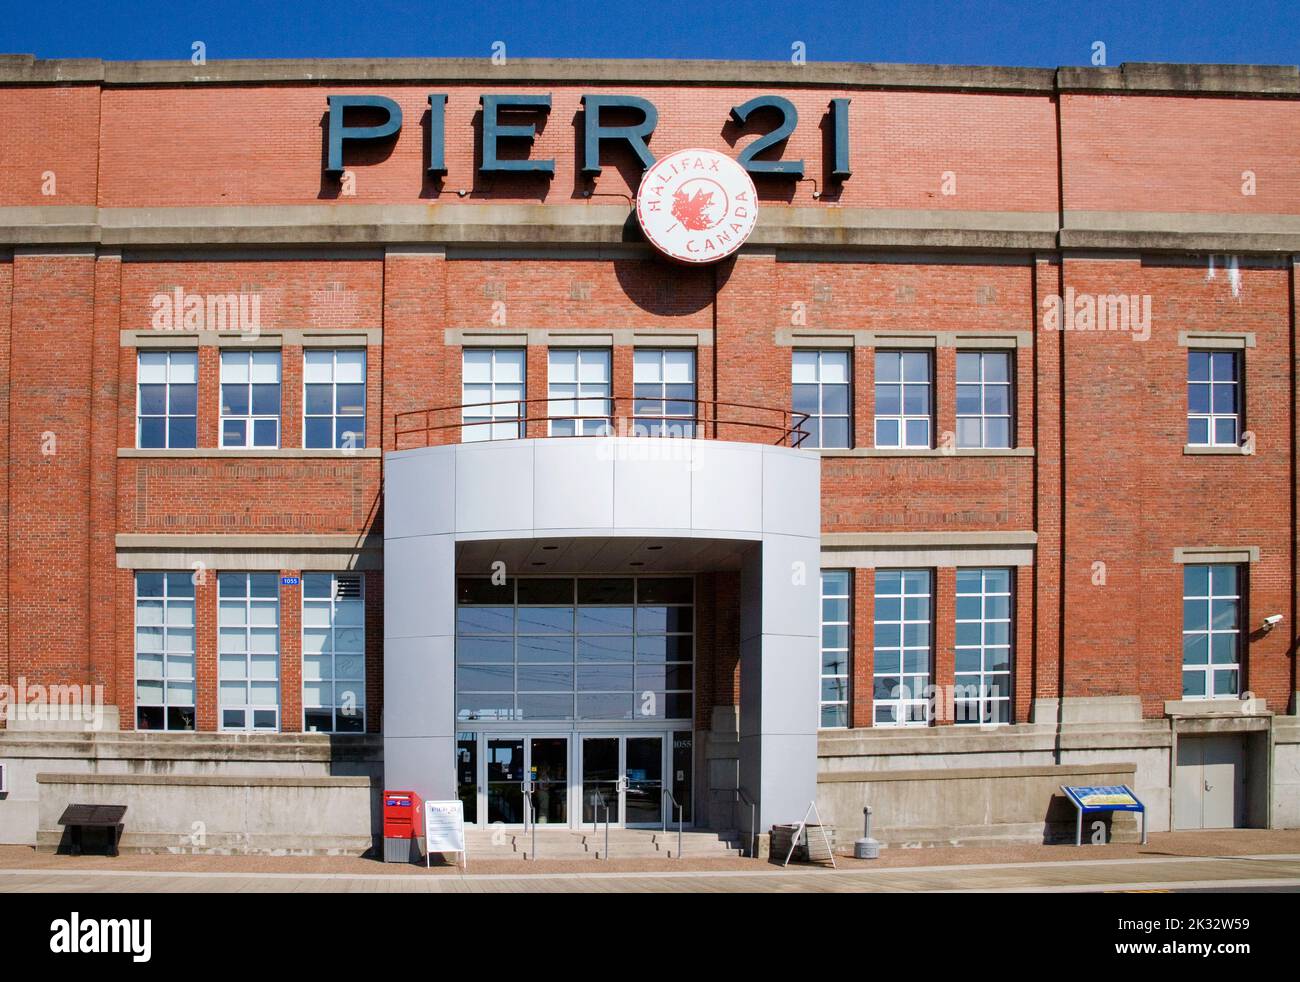 pier 21 houses immegration records for canada in halifax nova scotia Stock Photo